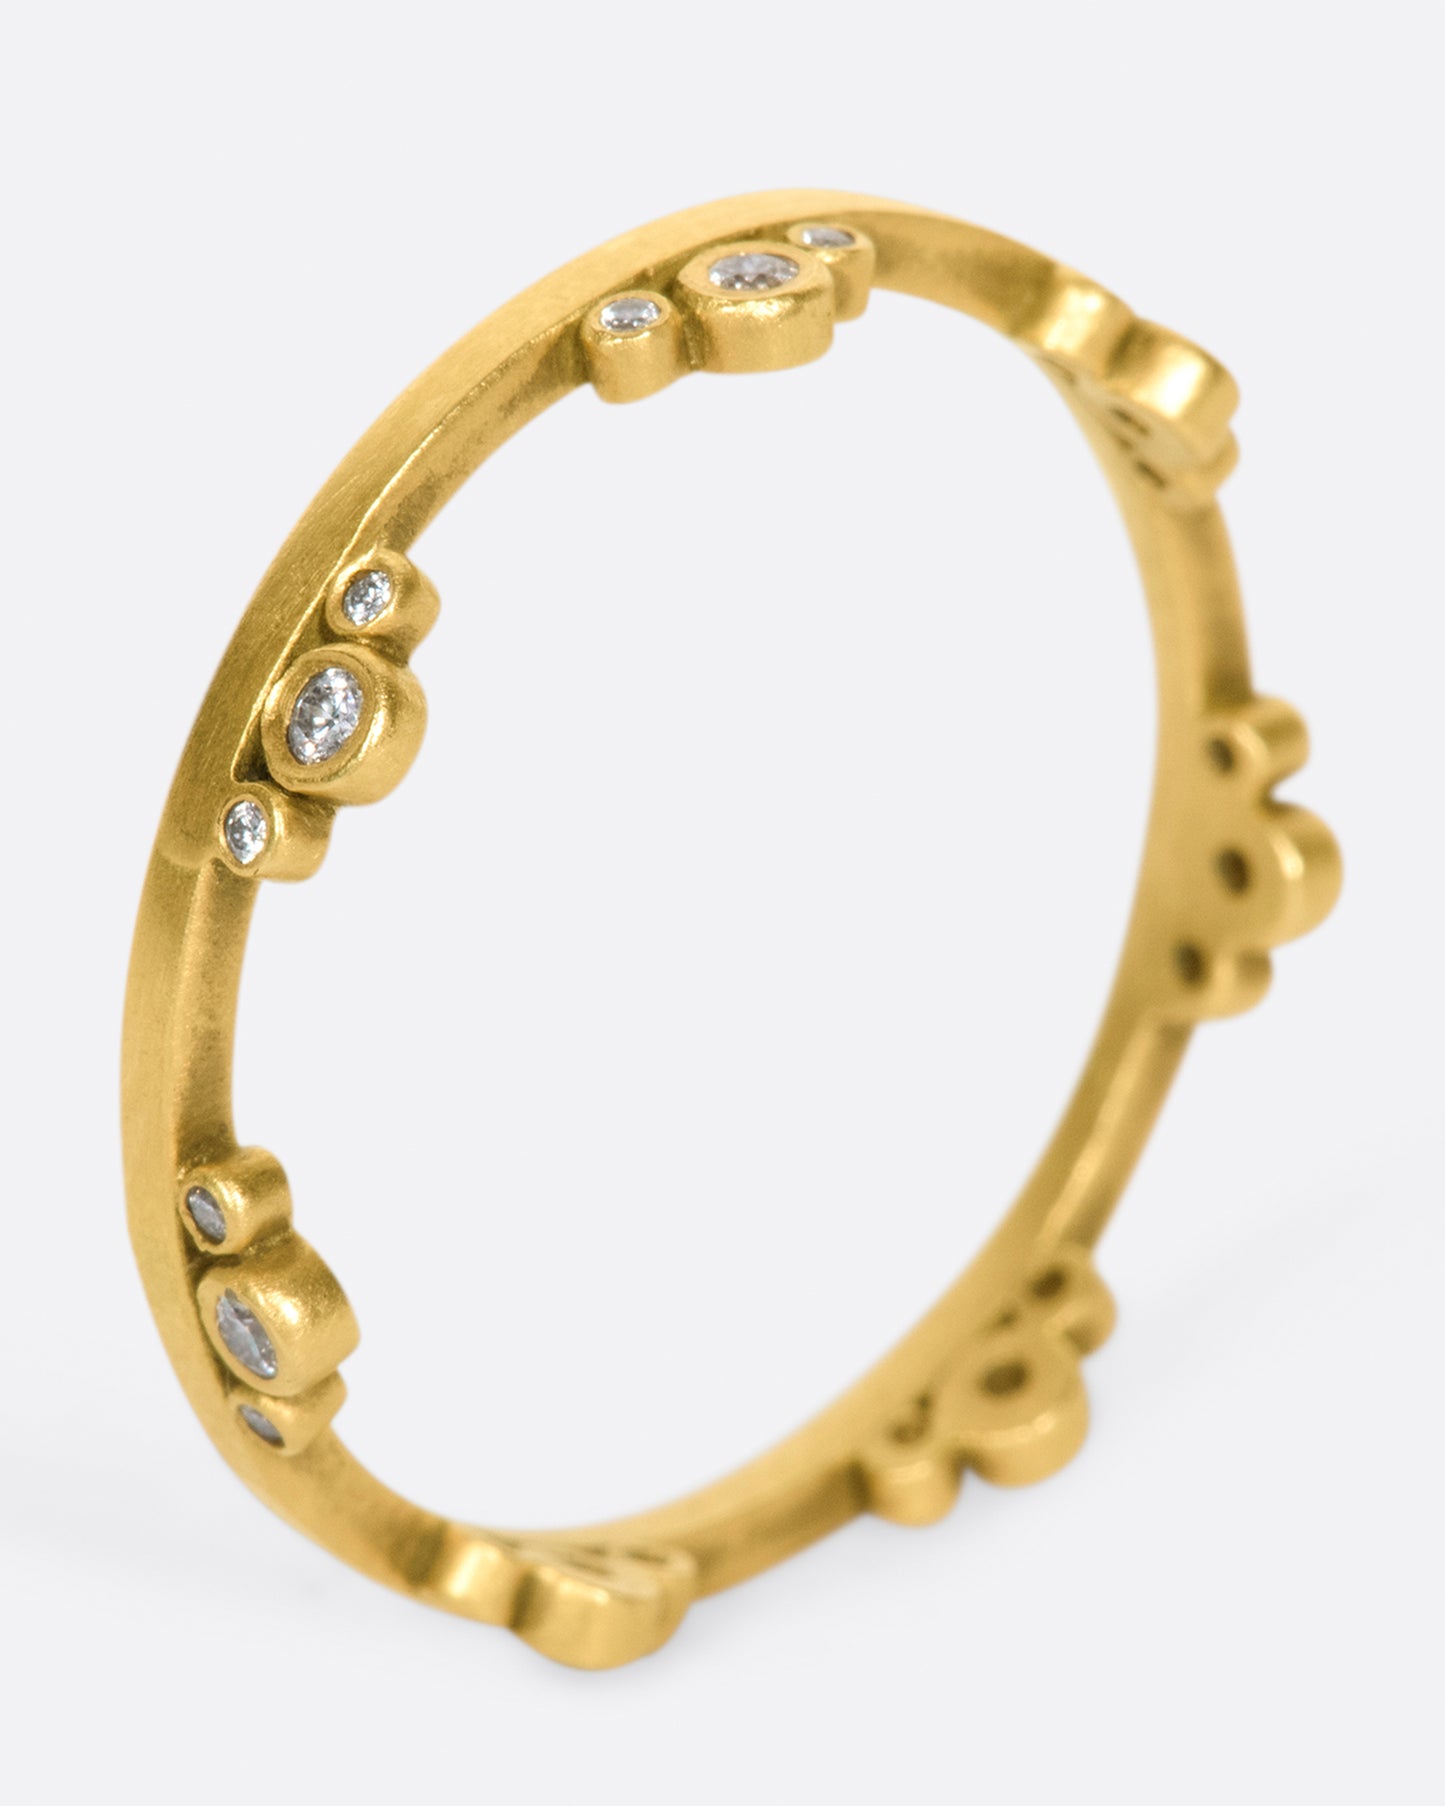 A matte gold band crowned with seven trios of diamonds.